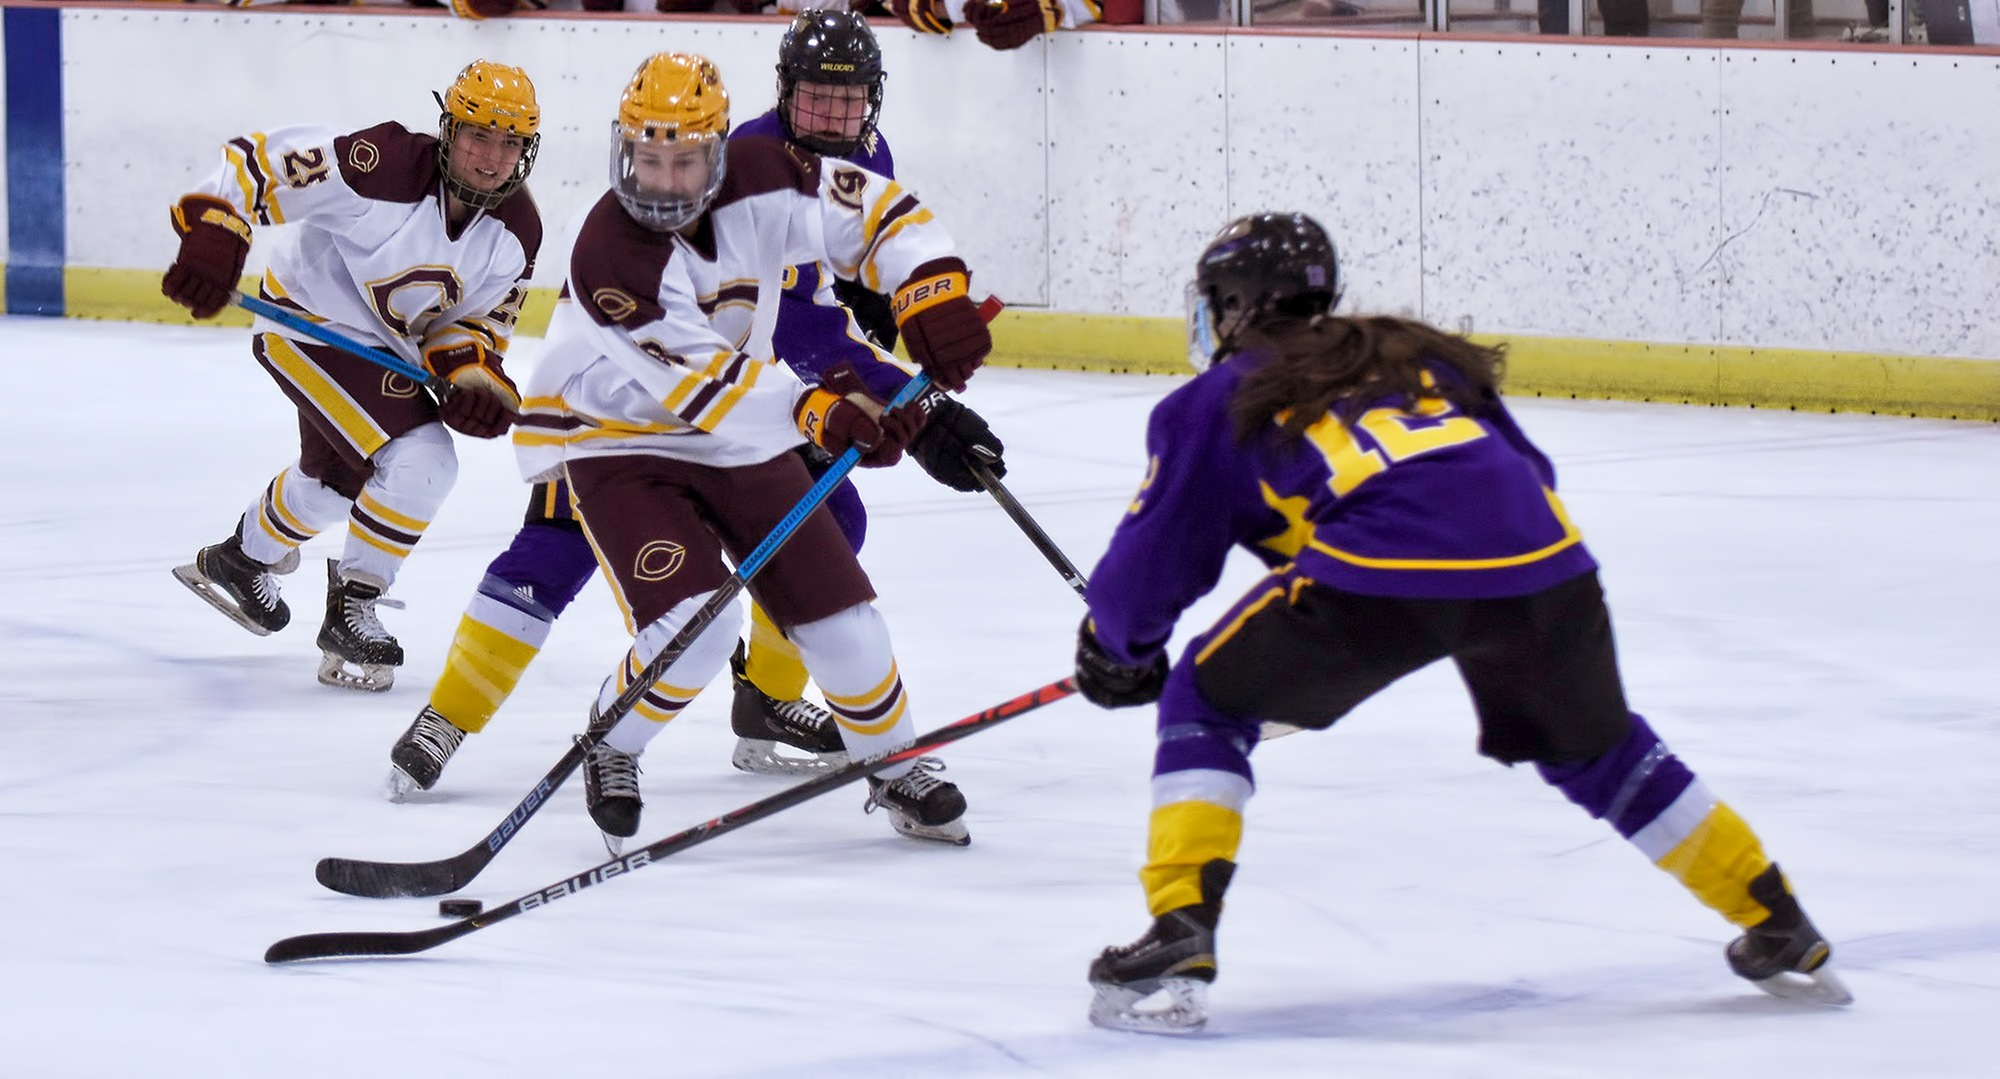 The Cobbers bring the puck up the ice during their series finale with St. Kate's.